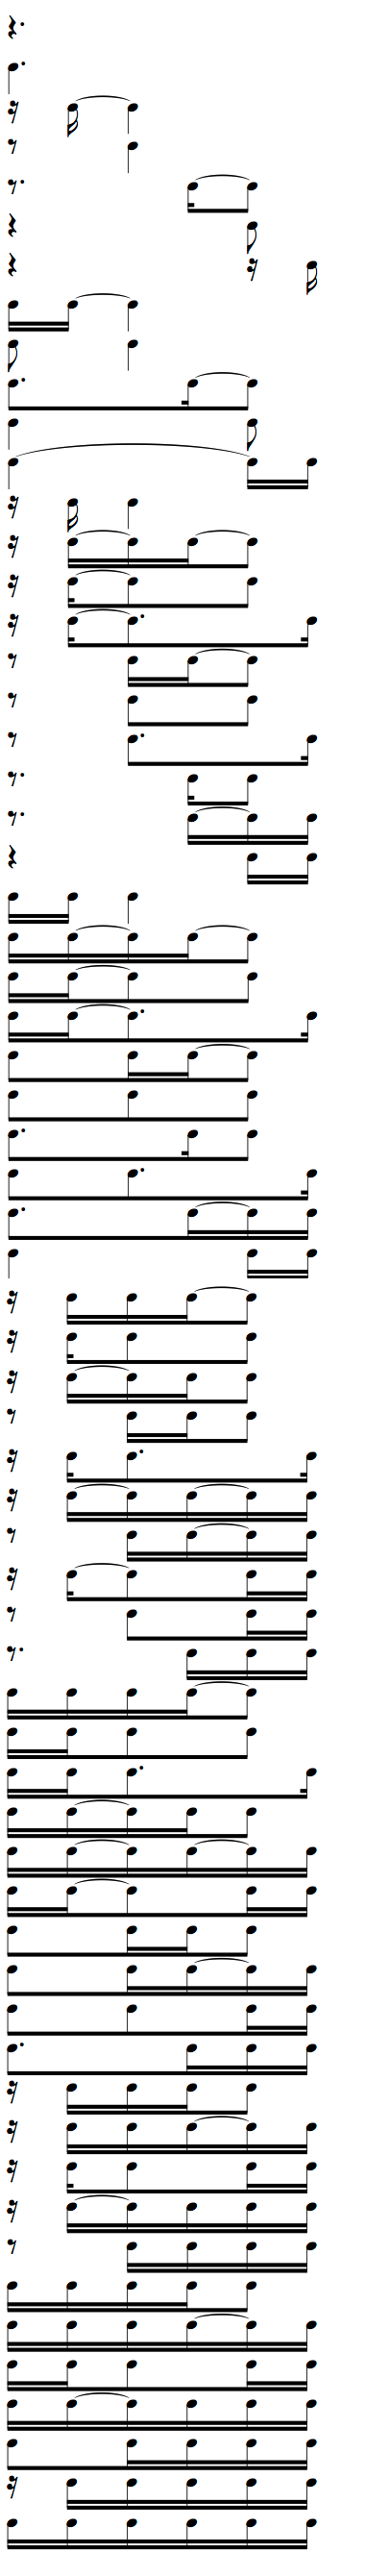 Complete Rhythms cheat sheet for Dotted Quarter Note with 16th Notes Tied Ties Weak Beat